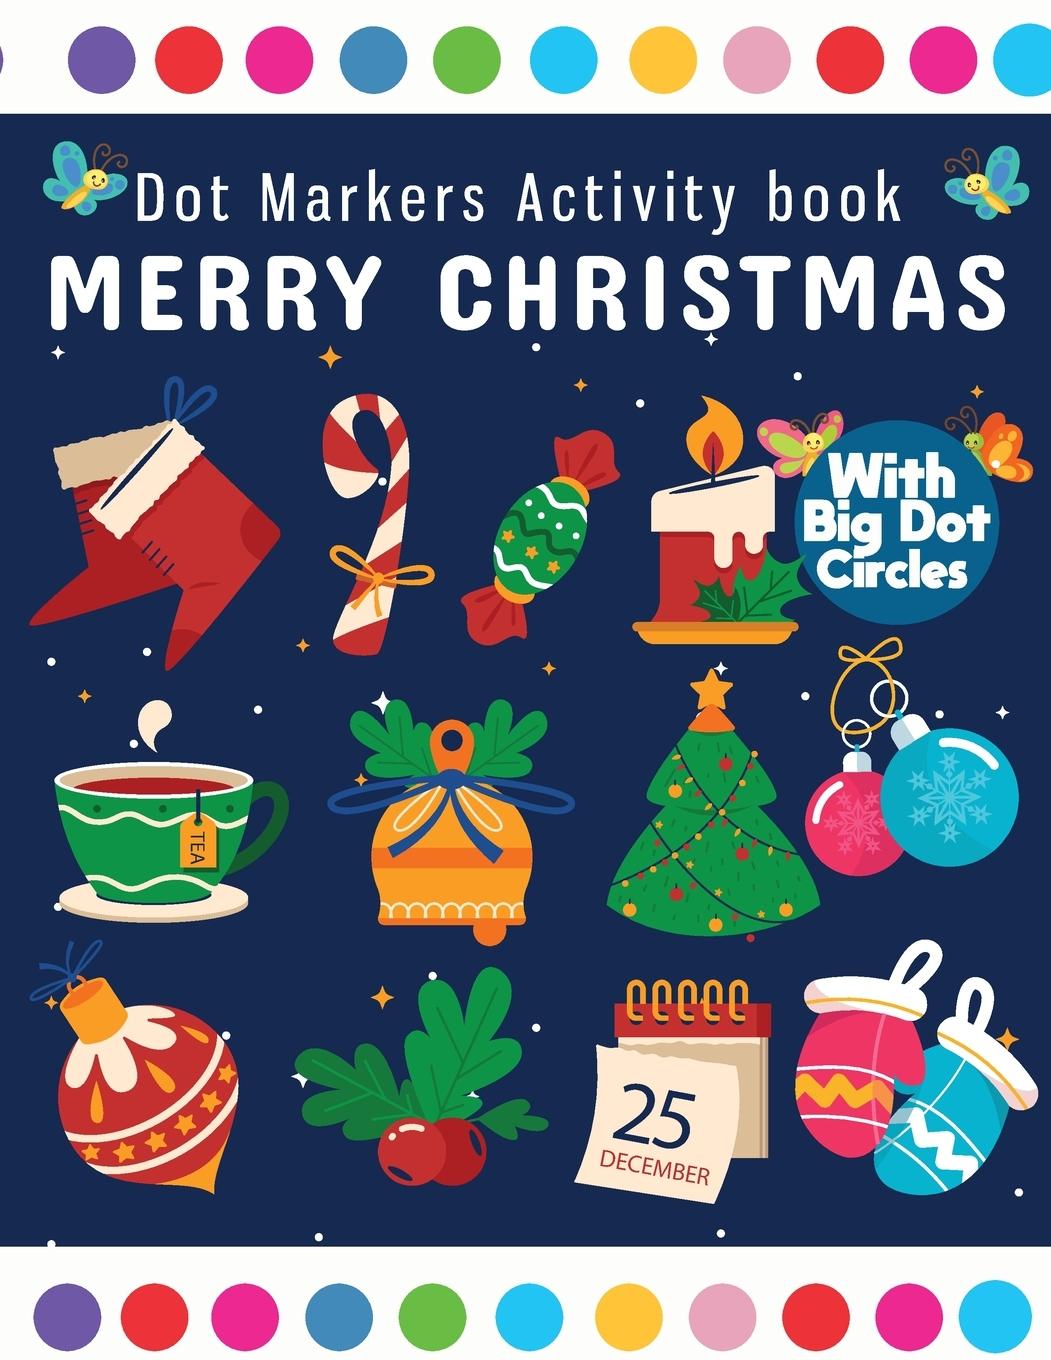 Book Dot Markers Activity Book Merry Christmas 